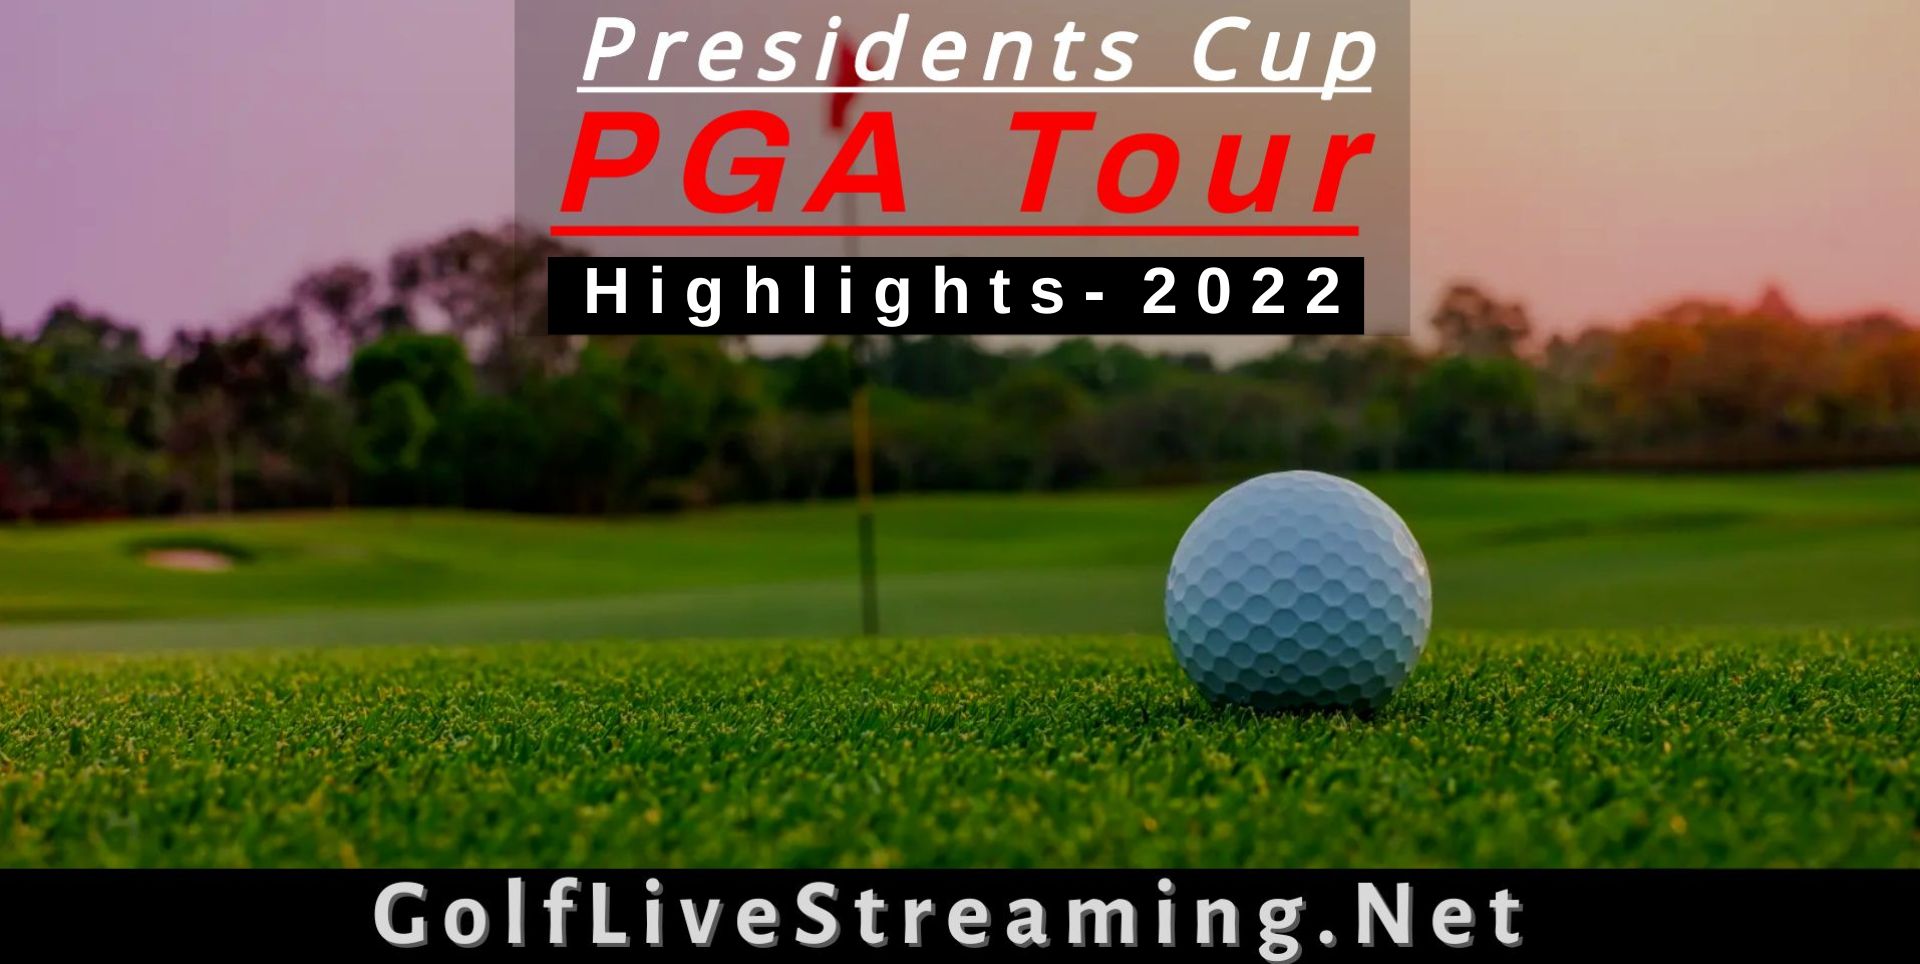 Presidents Cup Round 3 Highlights 2022 PGA Tour